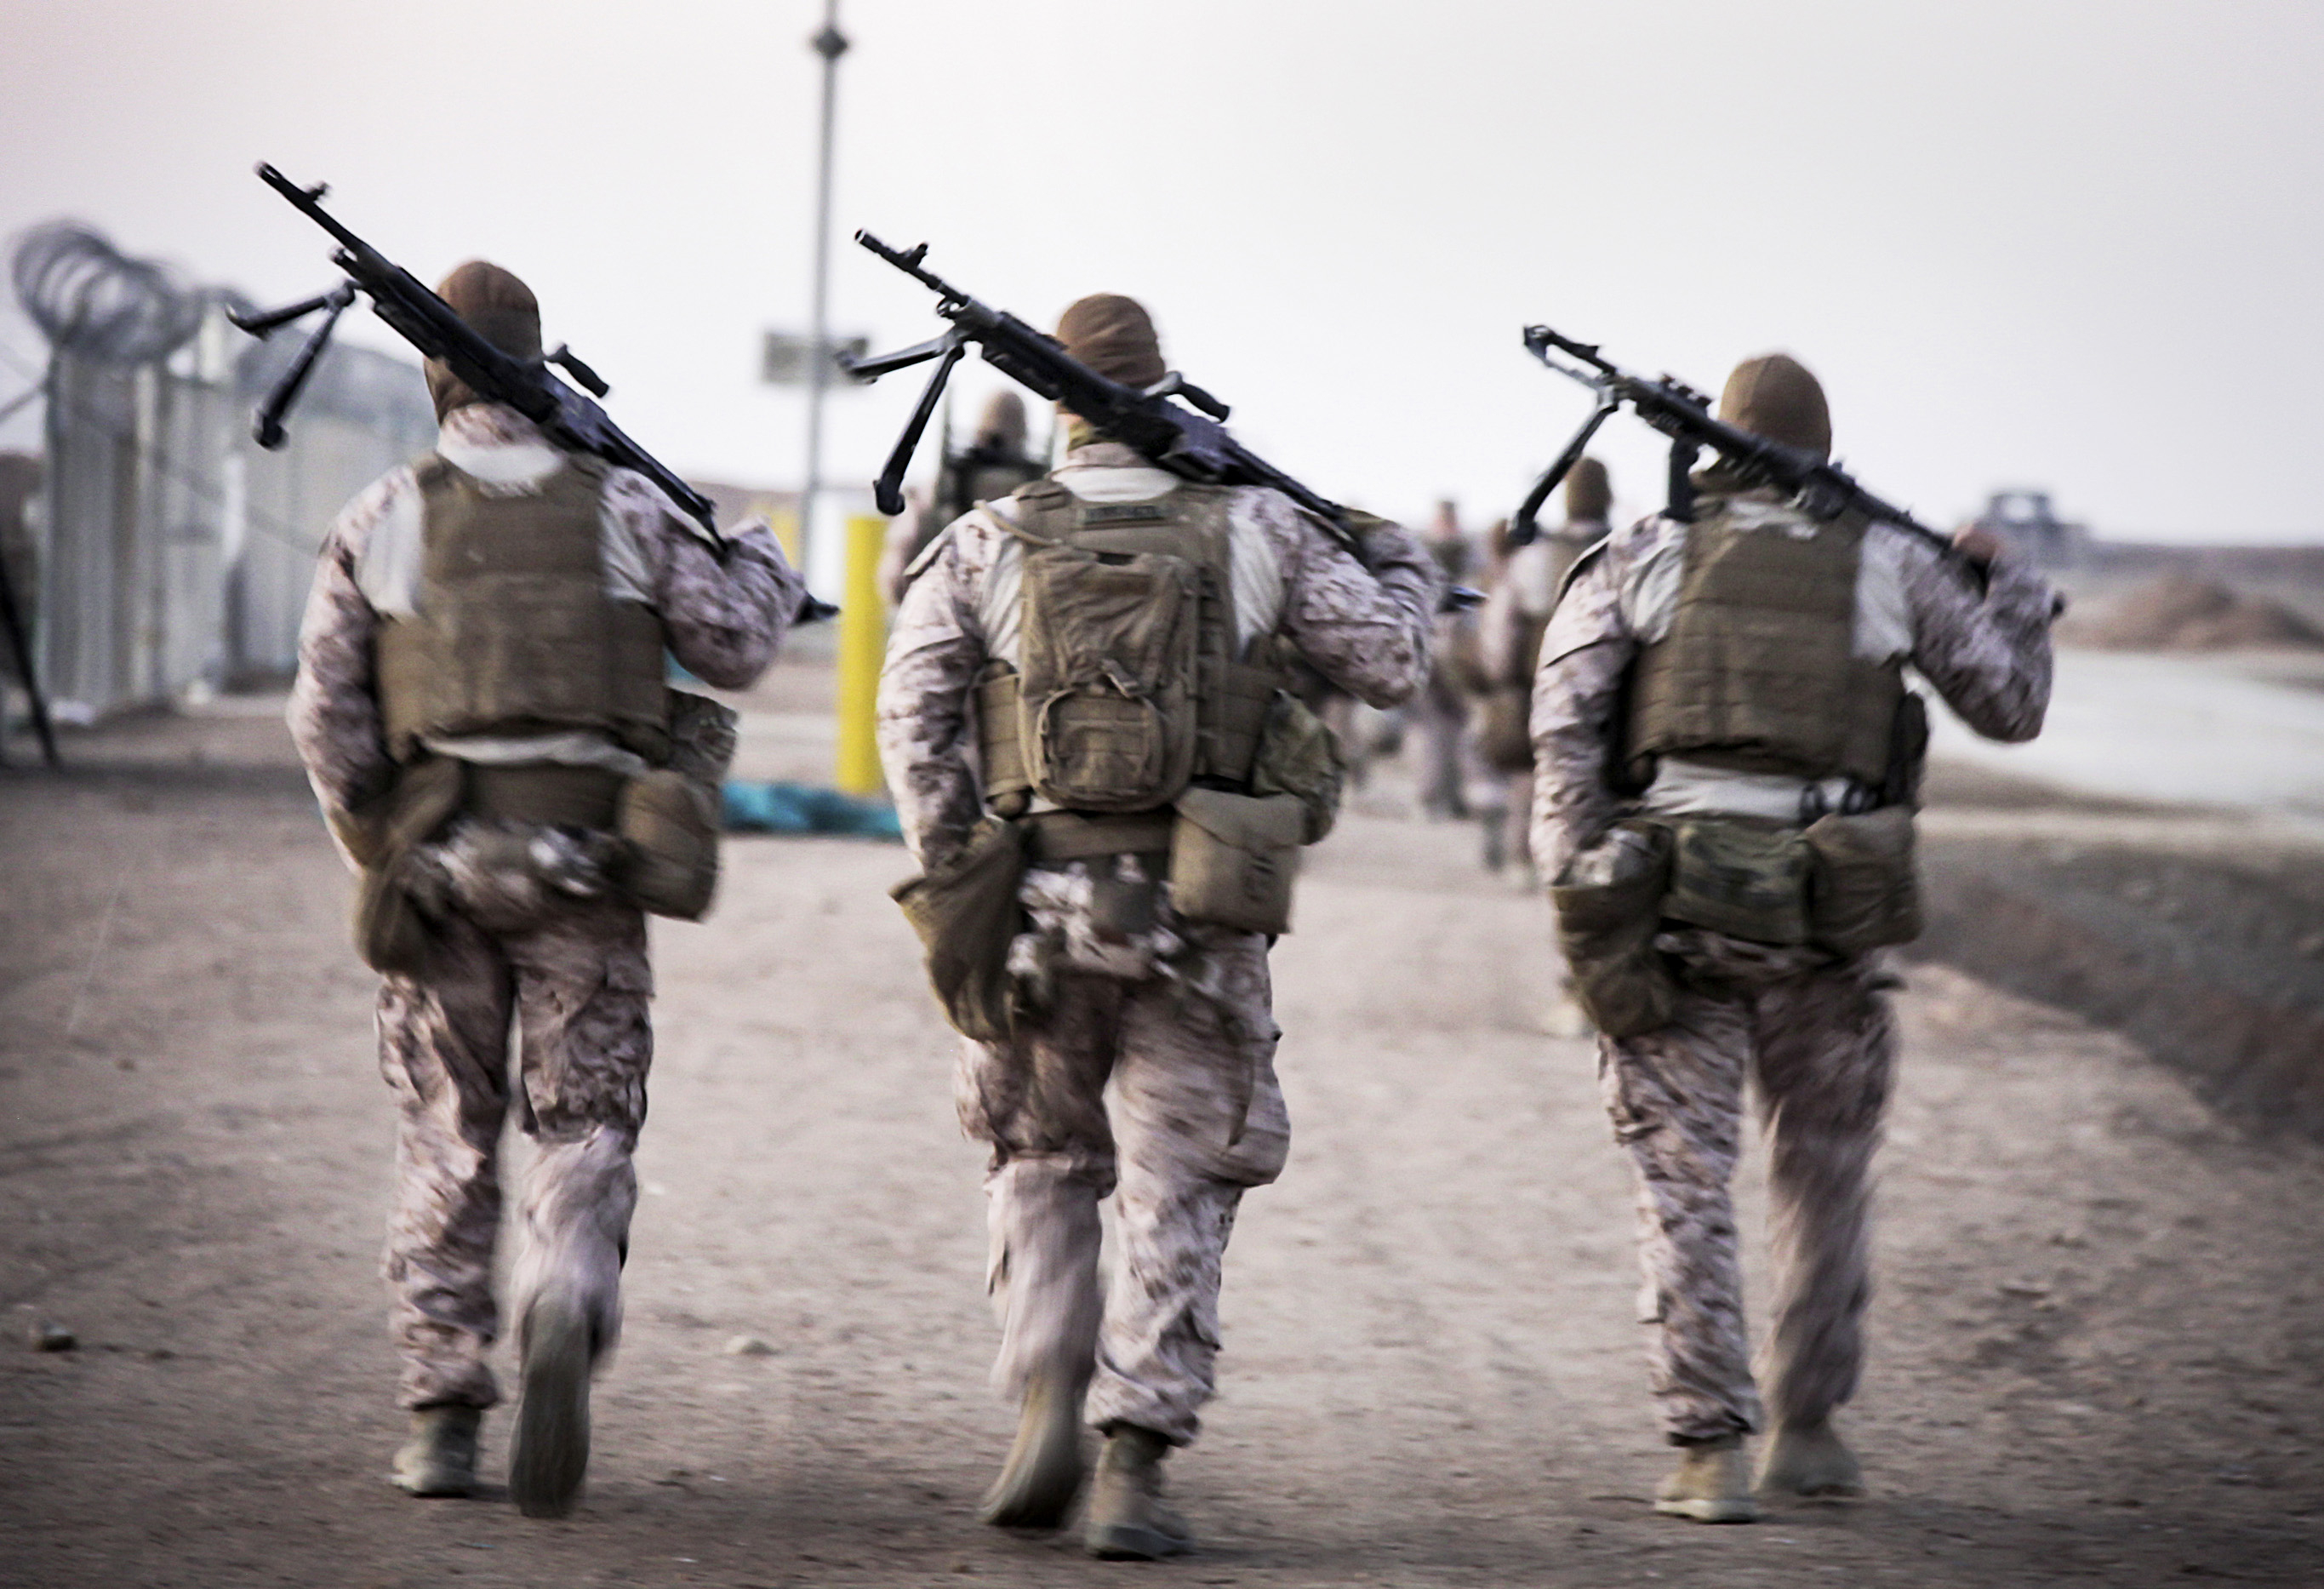 2731x1867 Wallpaper : Afghanistan, Motion, USMC, walking, three, back, gun, military, step, marines, backs, af, marinecorps, machinegun, musketeers, combatoperations, oef, ISAF, echo29, helmandprovince, coalitionforces, rct7, servicemembers, campleatherneck ..